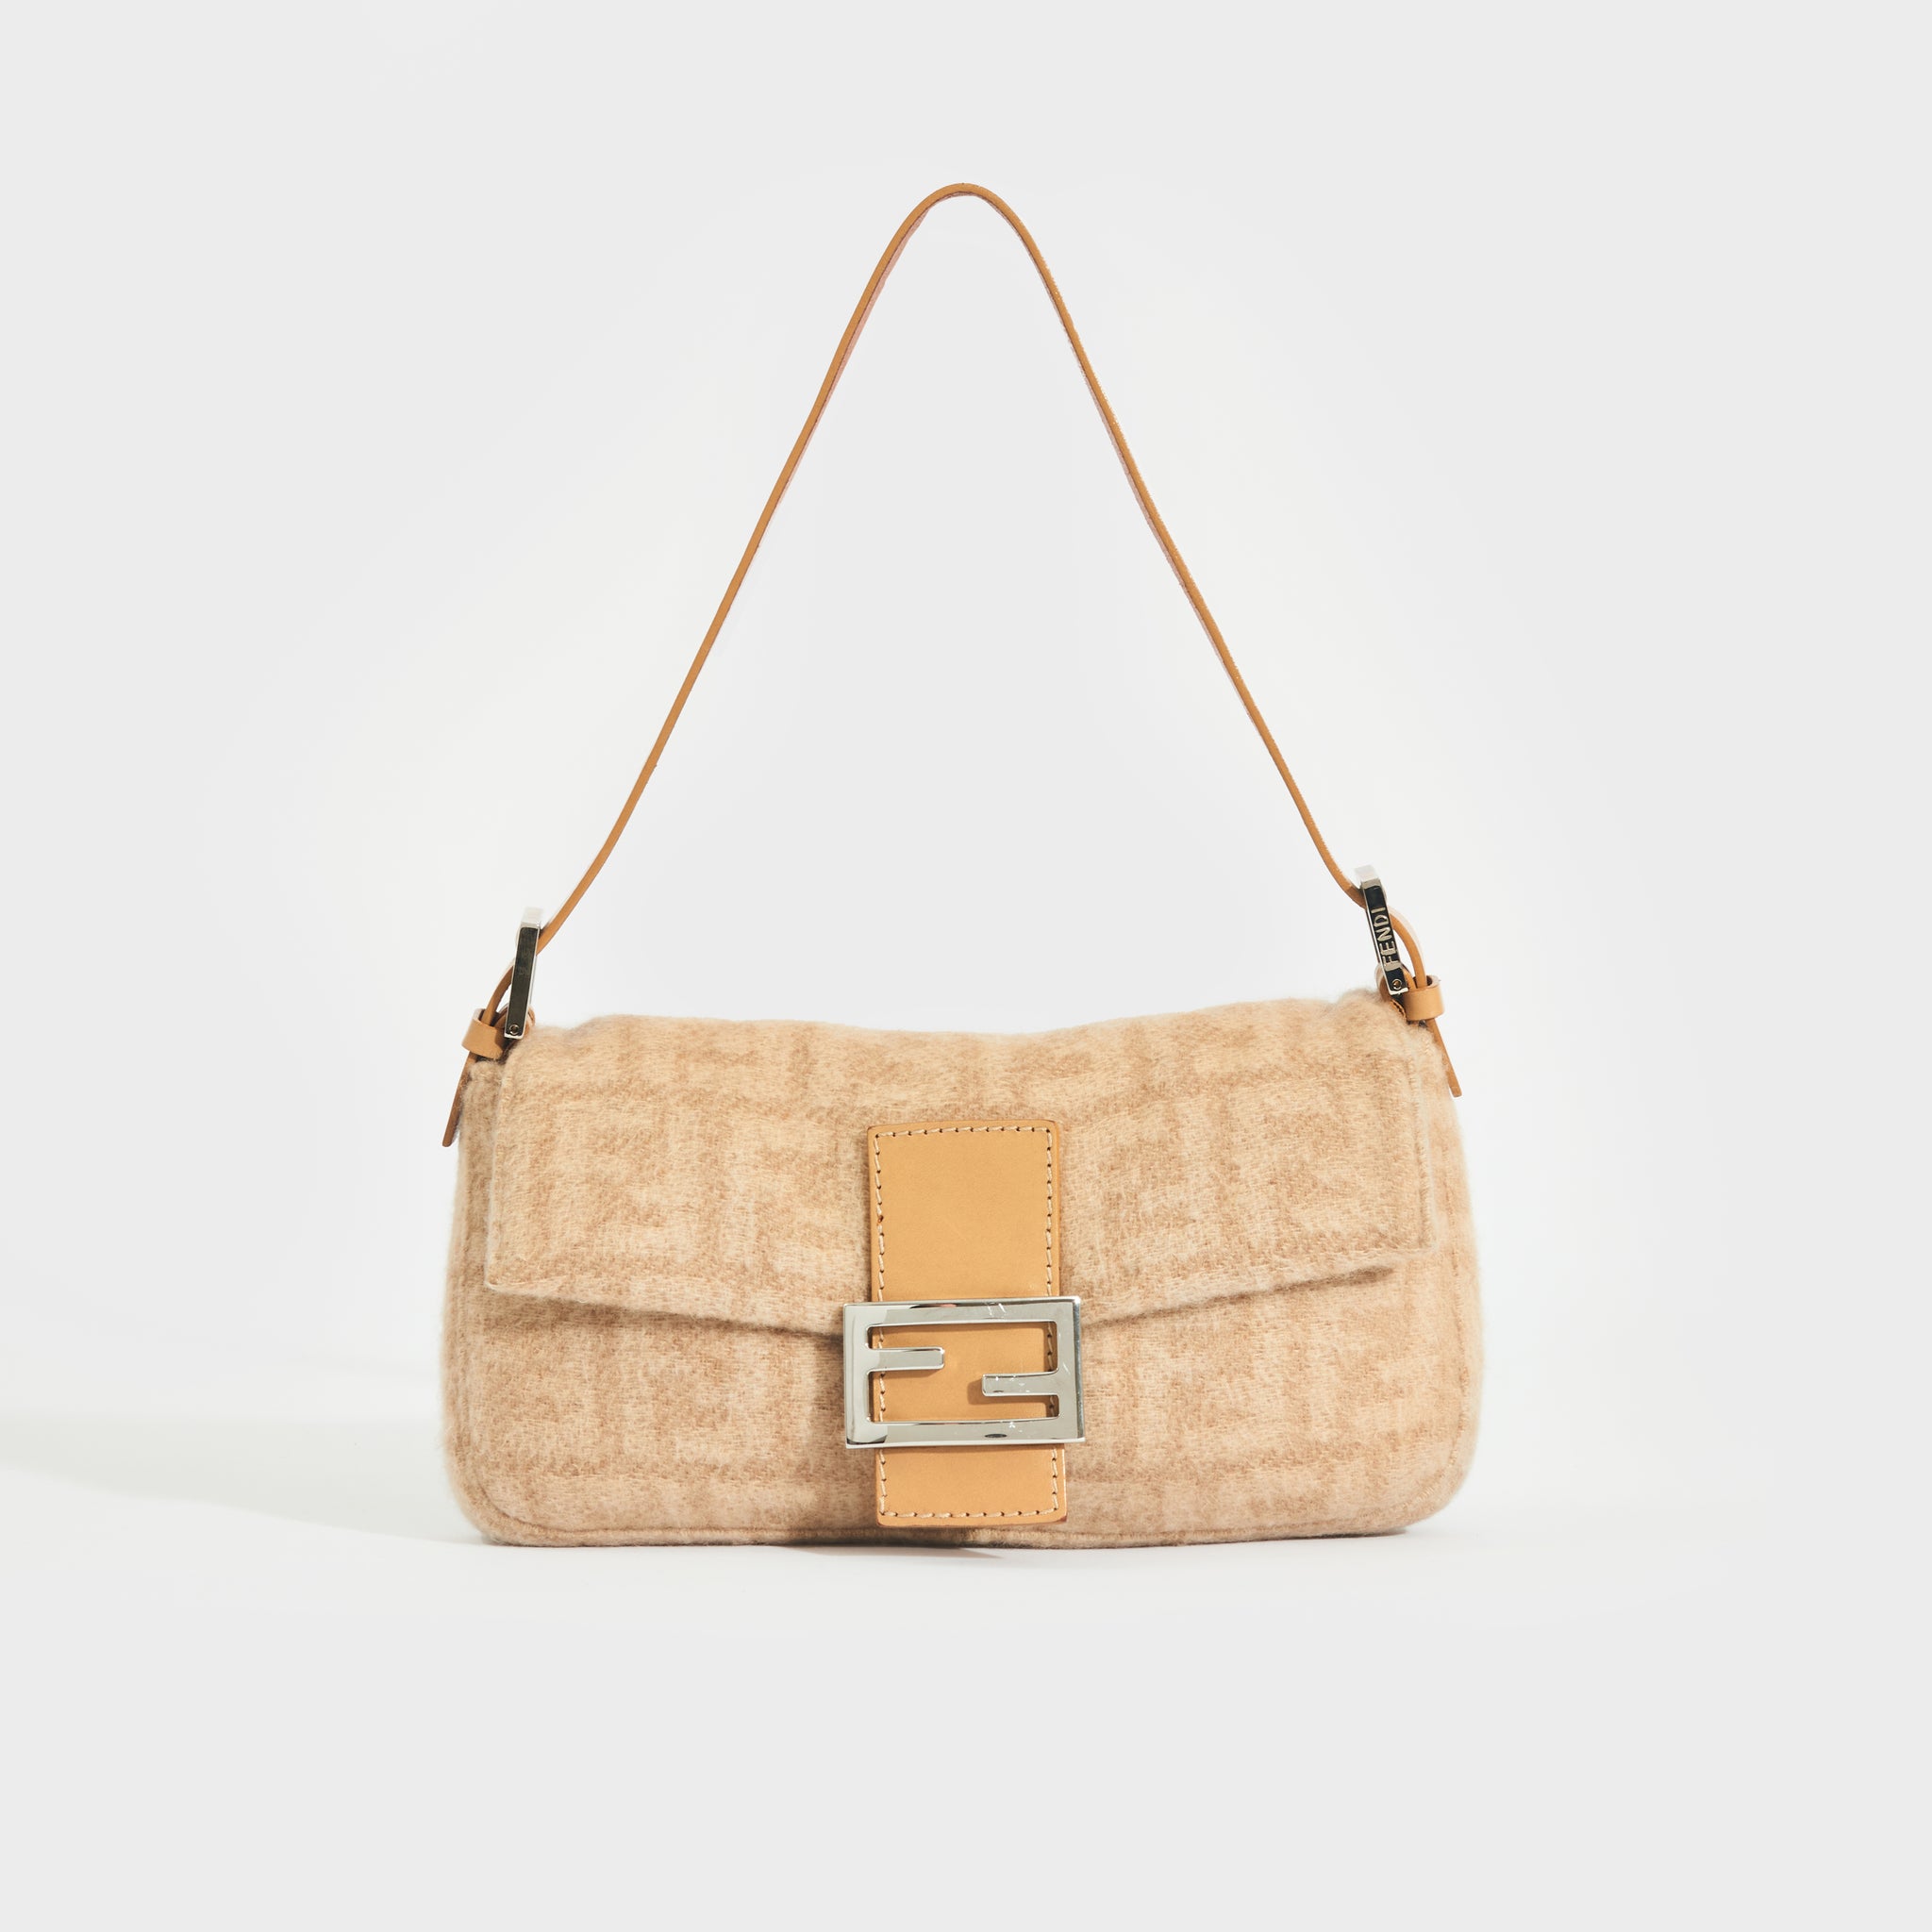 Fendi's Baguette bag – where to buy new and secondhand